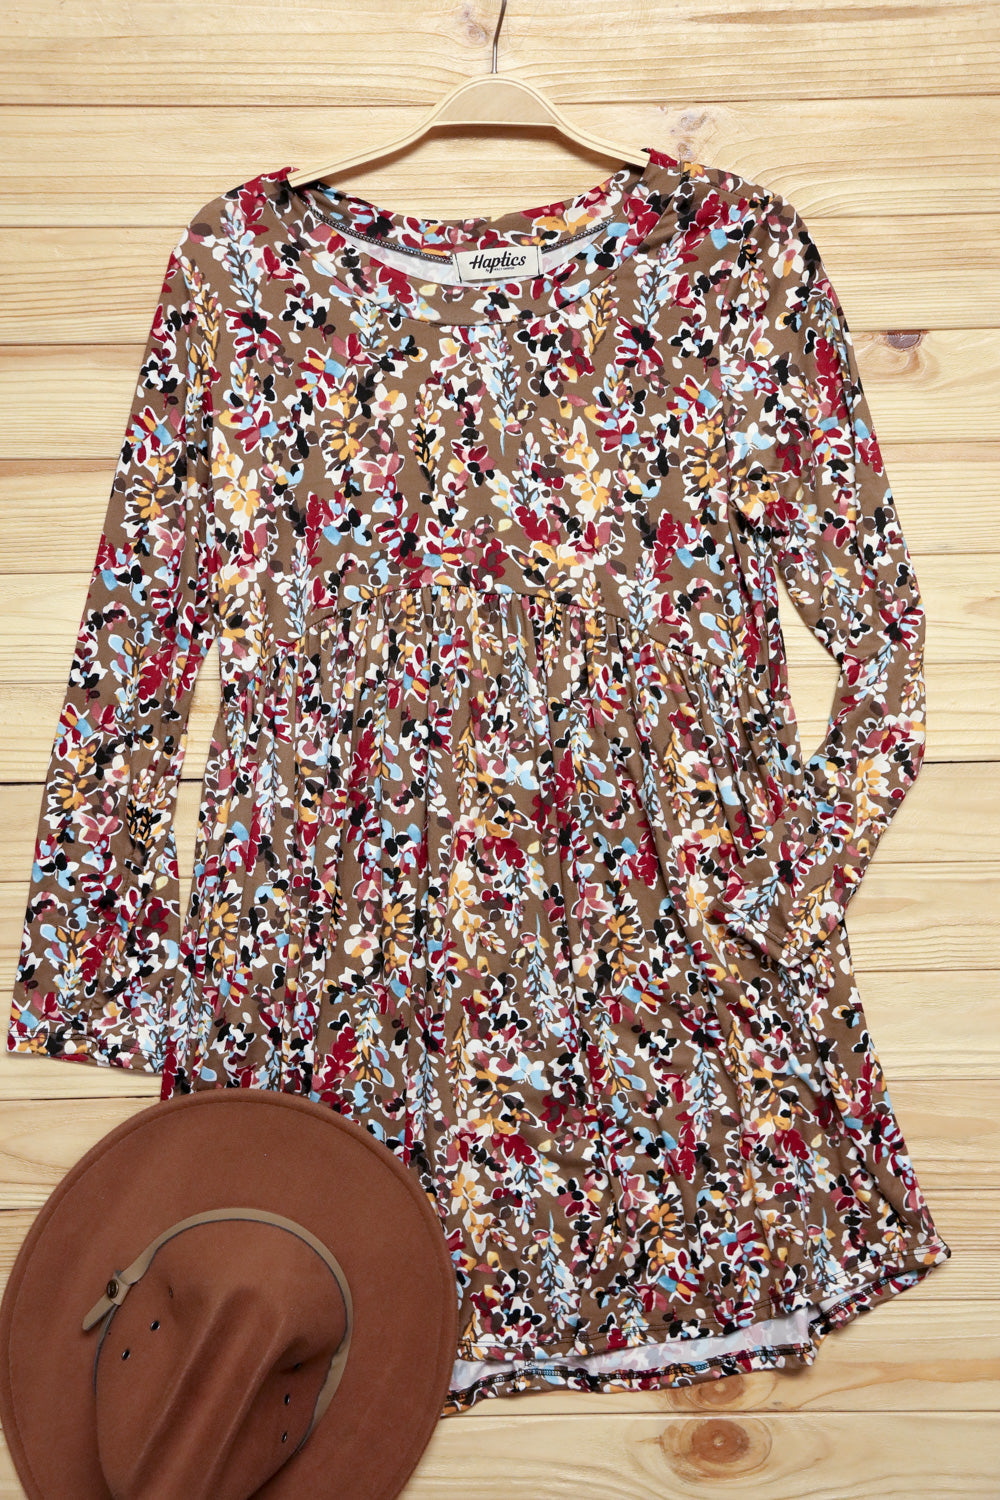 Taupe & Maroon Floral Long Sleeve Babydoll Dress - Sybaritic Bags & Clothing